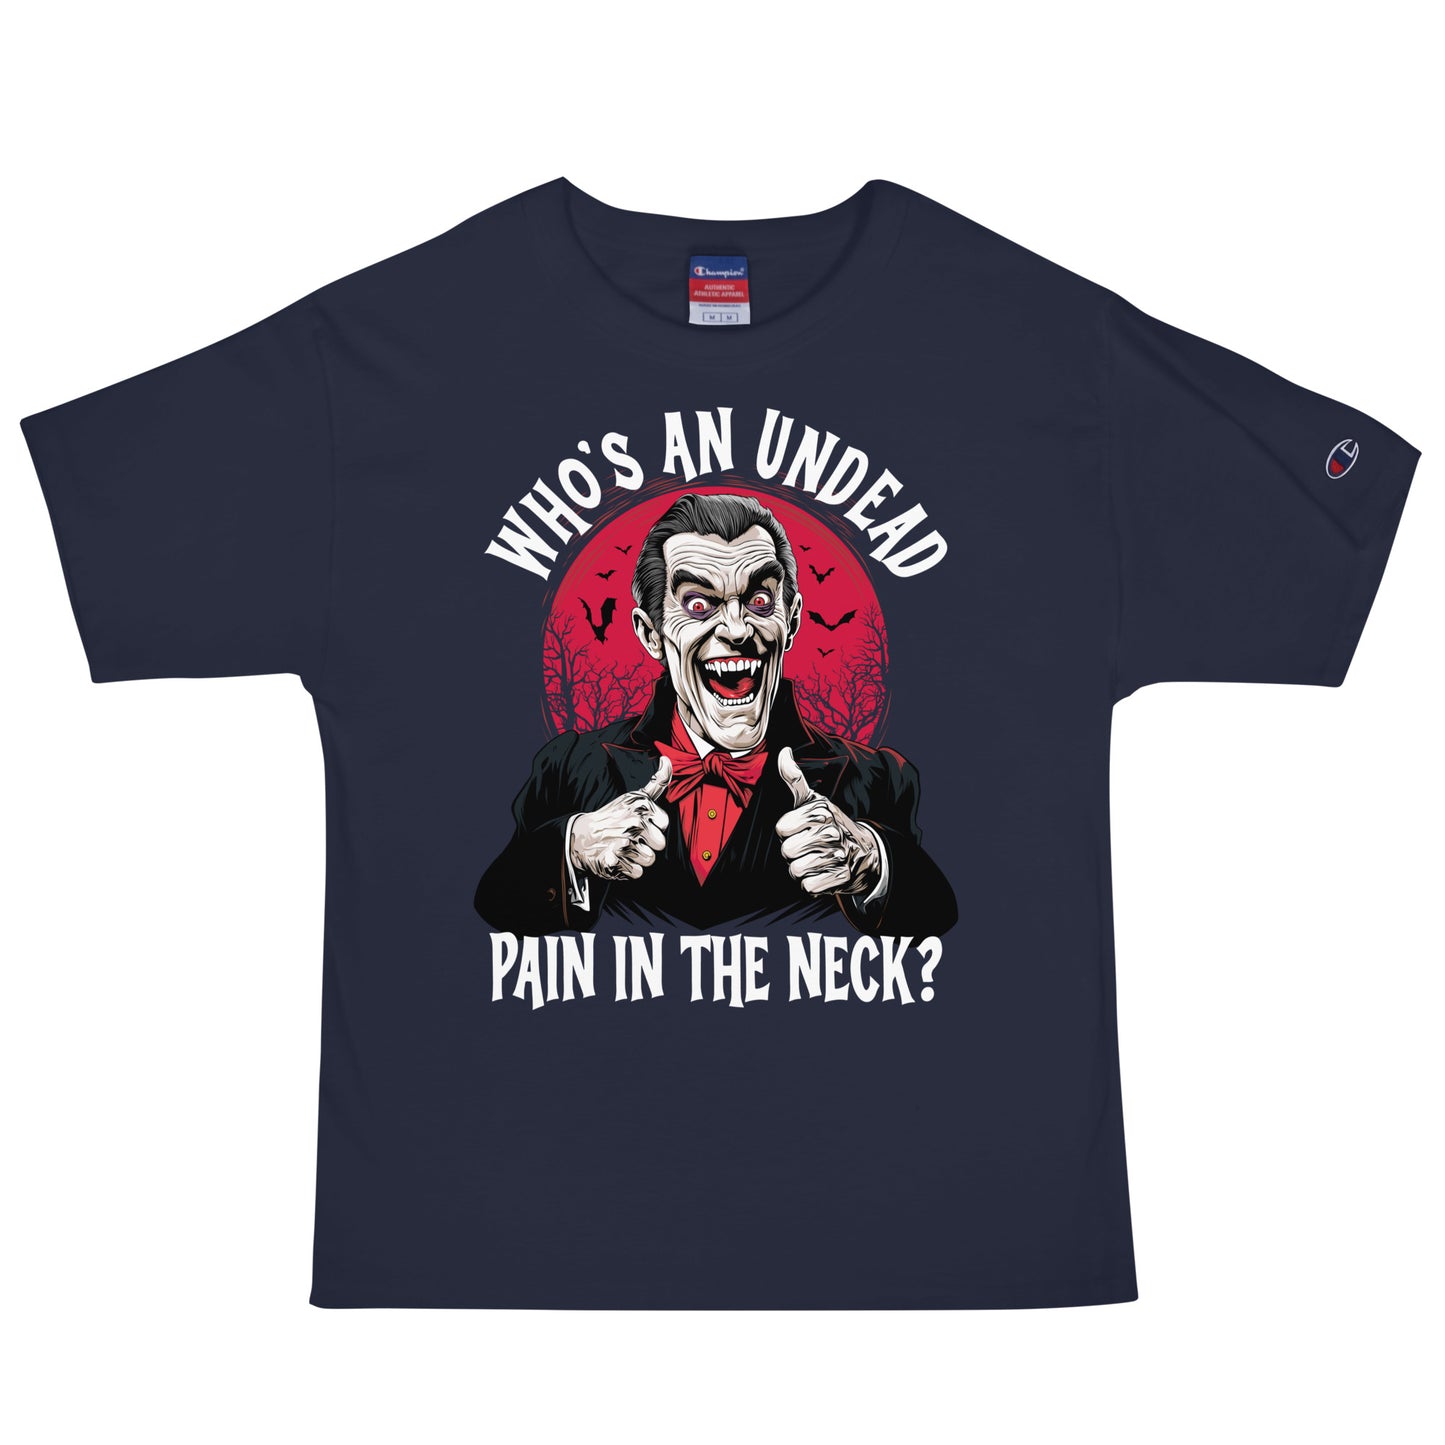 Who's an Undead pain in the neck? Men's Champion Relaxed Fit T-shirt